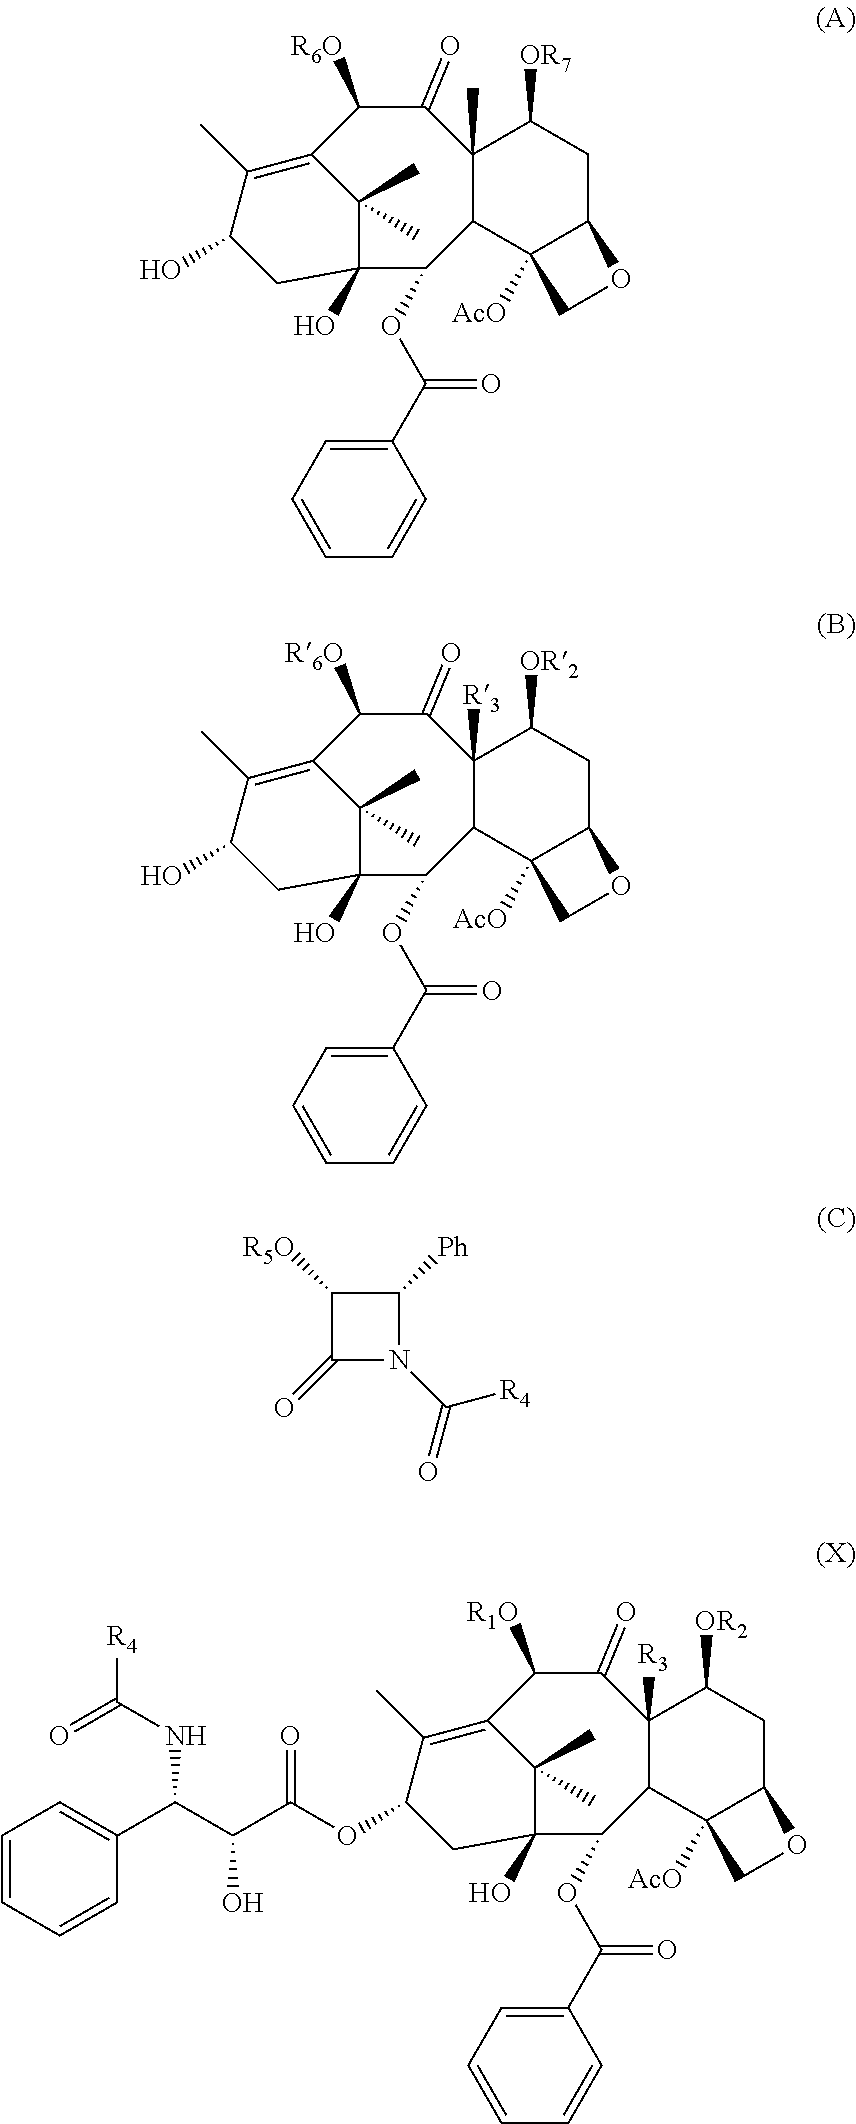 Process for preparing taxoids from baccatin derivatives using lewis acid catalyst